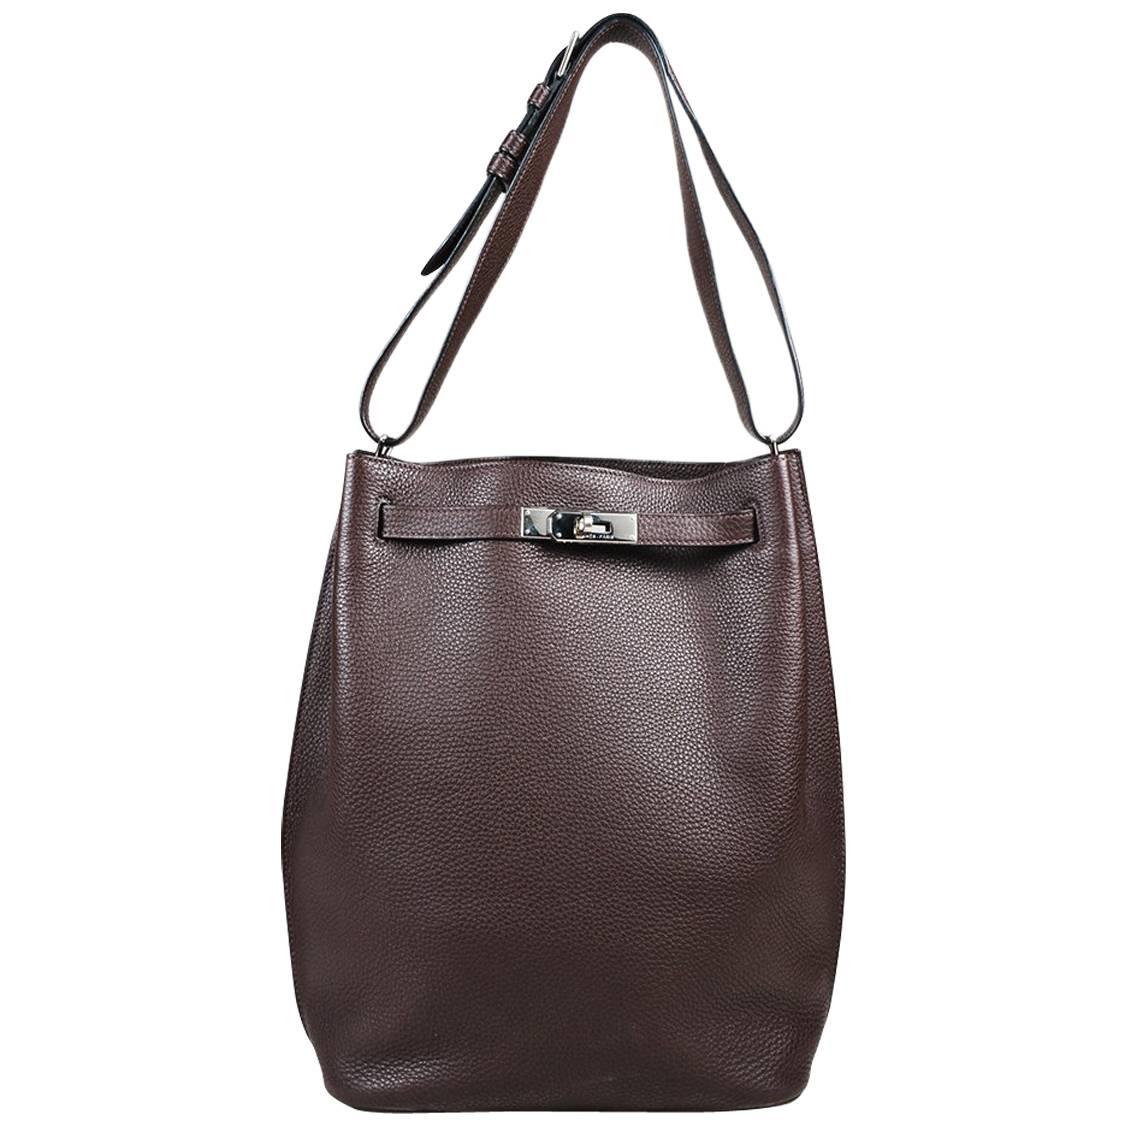 Hermes "Chocolate" Brown Togo Leather "So Kelly" 26 CM Bucket Bag For Sale